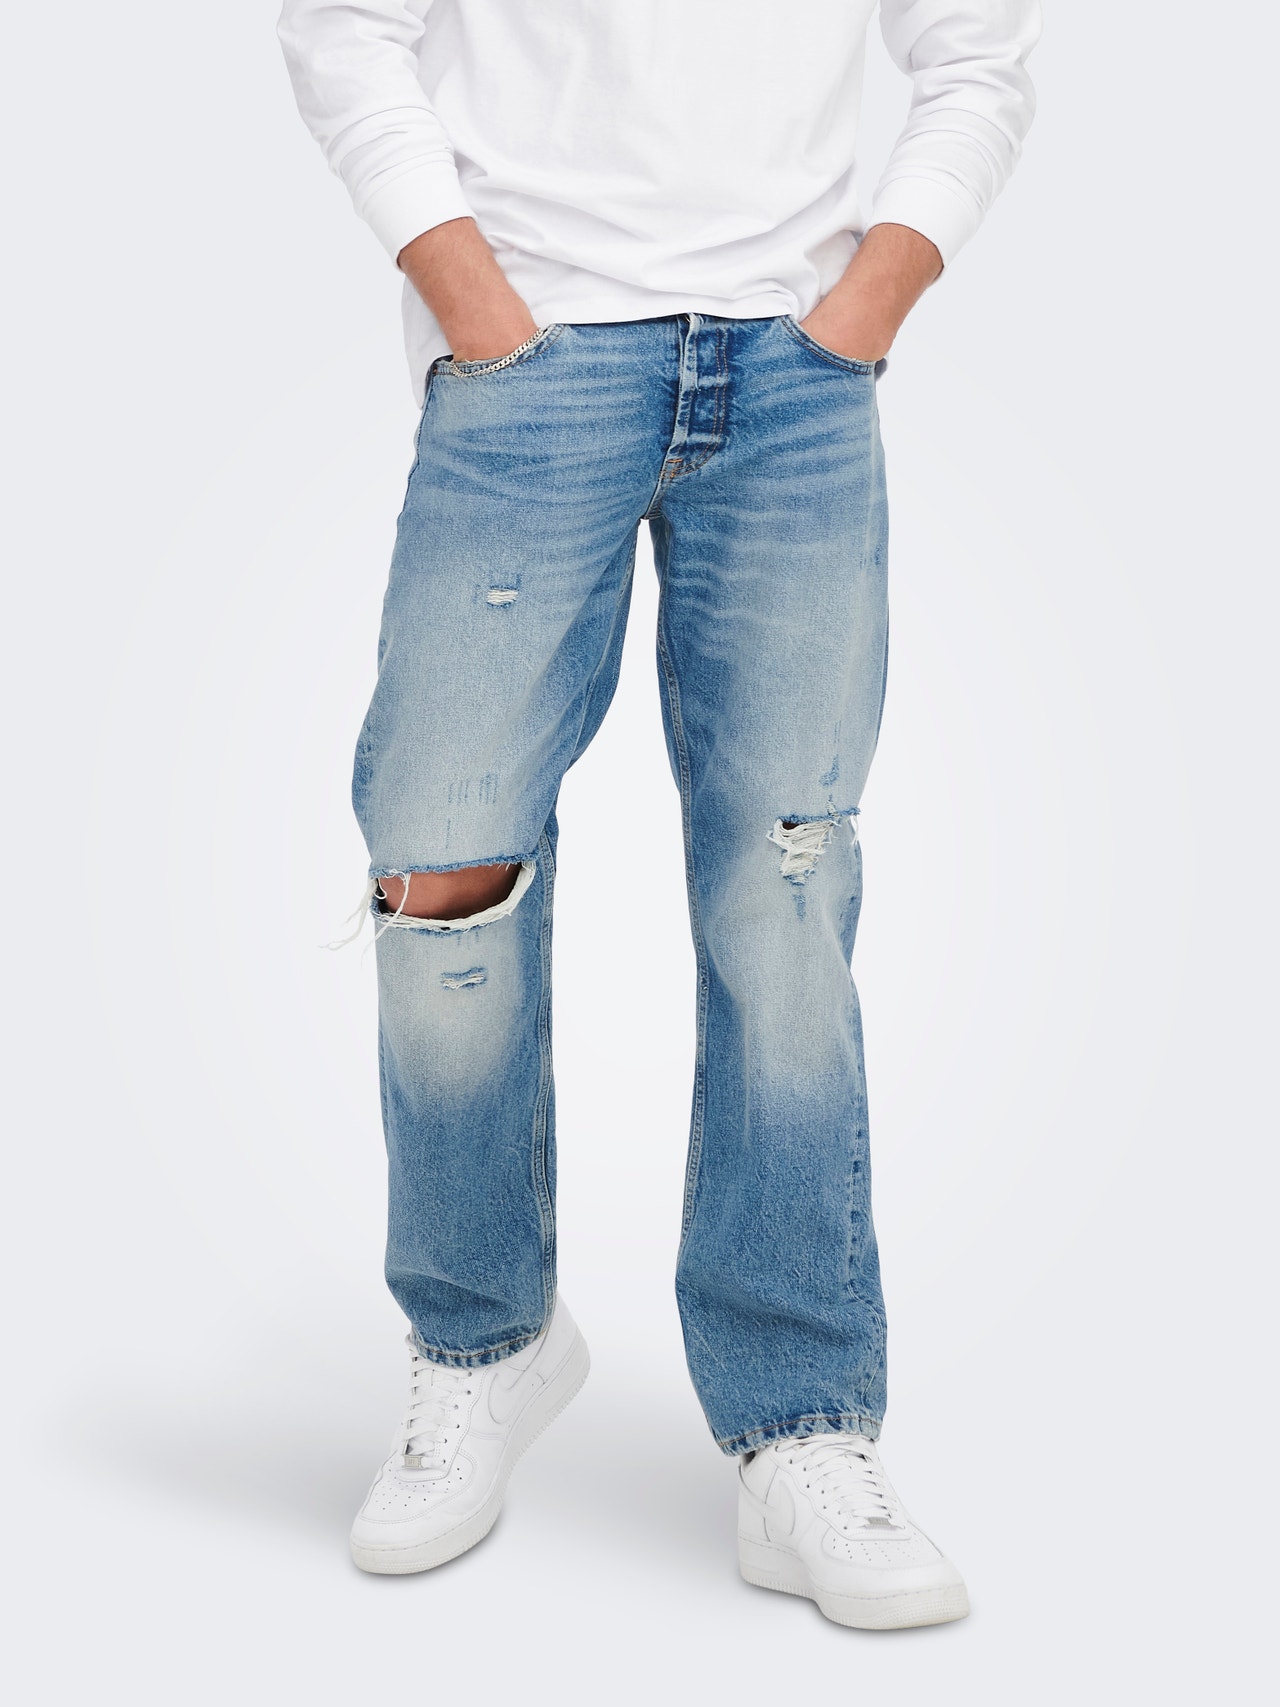 ONLY & SONS ONSEDGE LOOSE LIGHT BLUE 4067 JEANS NOOSONSEDGE LOOSE LIGHT BLUE 4067 JEANS NOOS -Light Blue Denim - 22024067